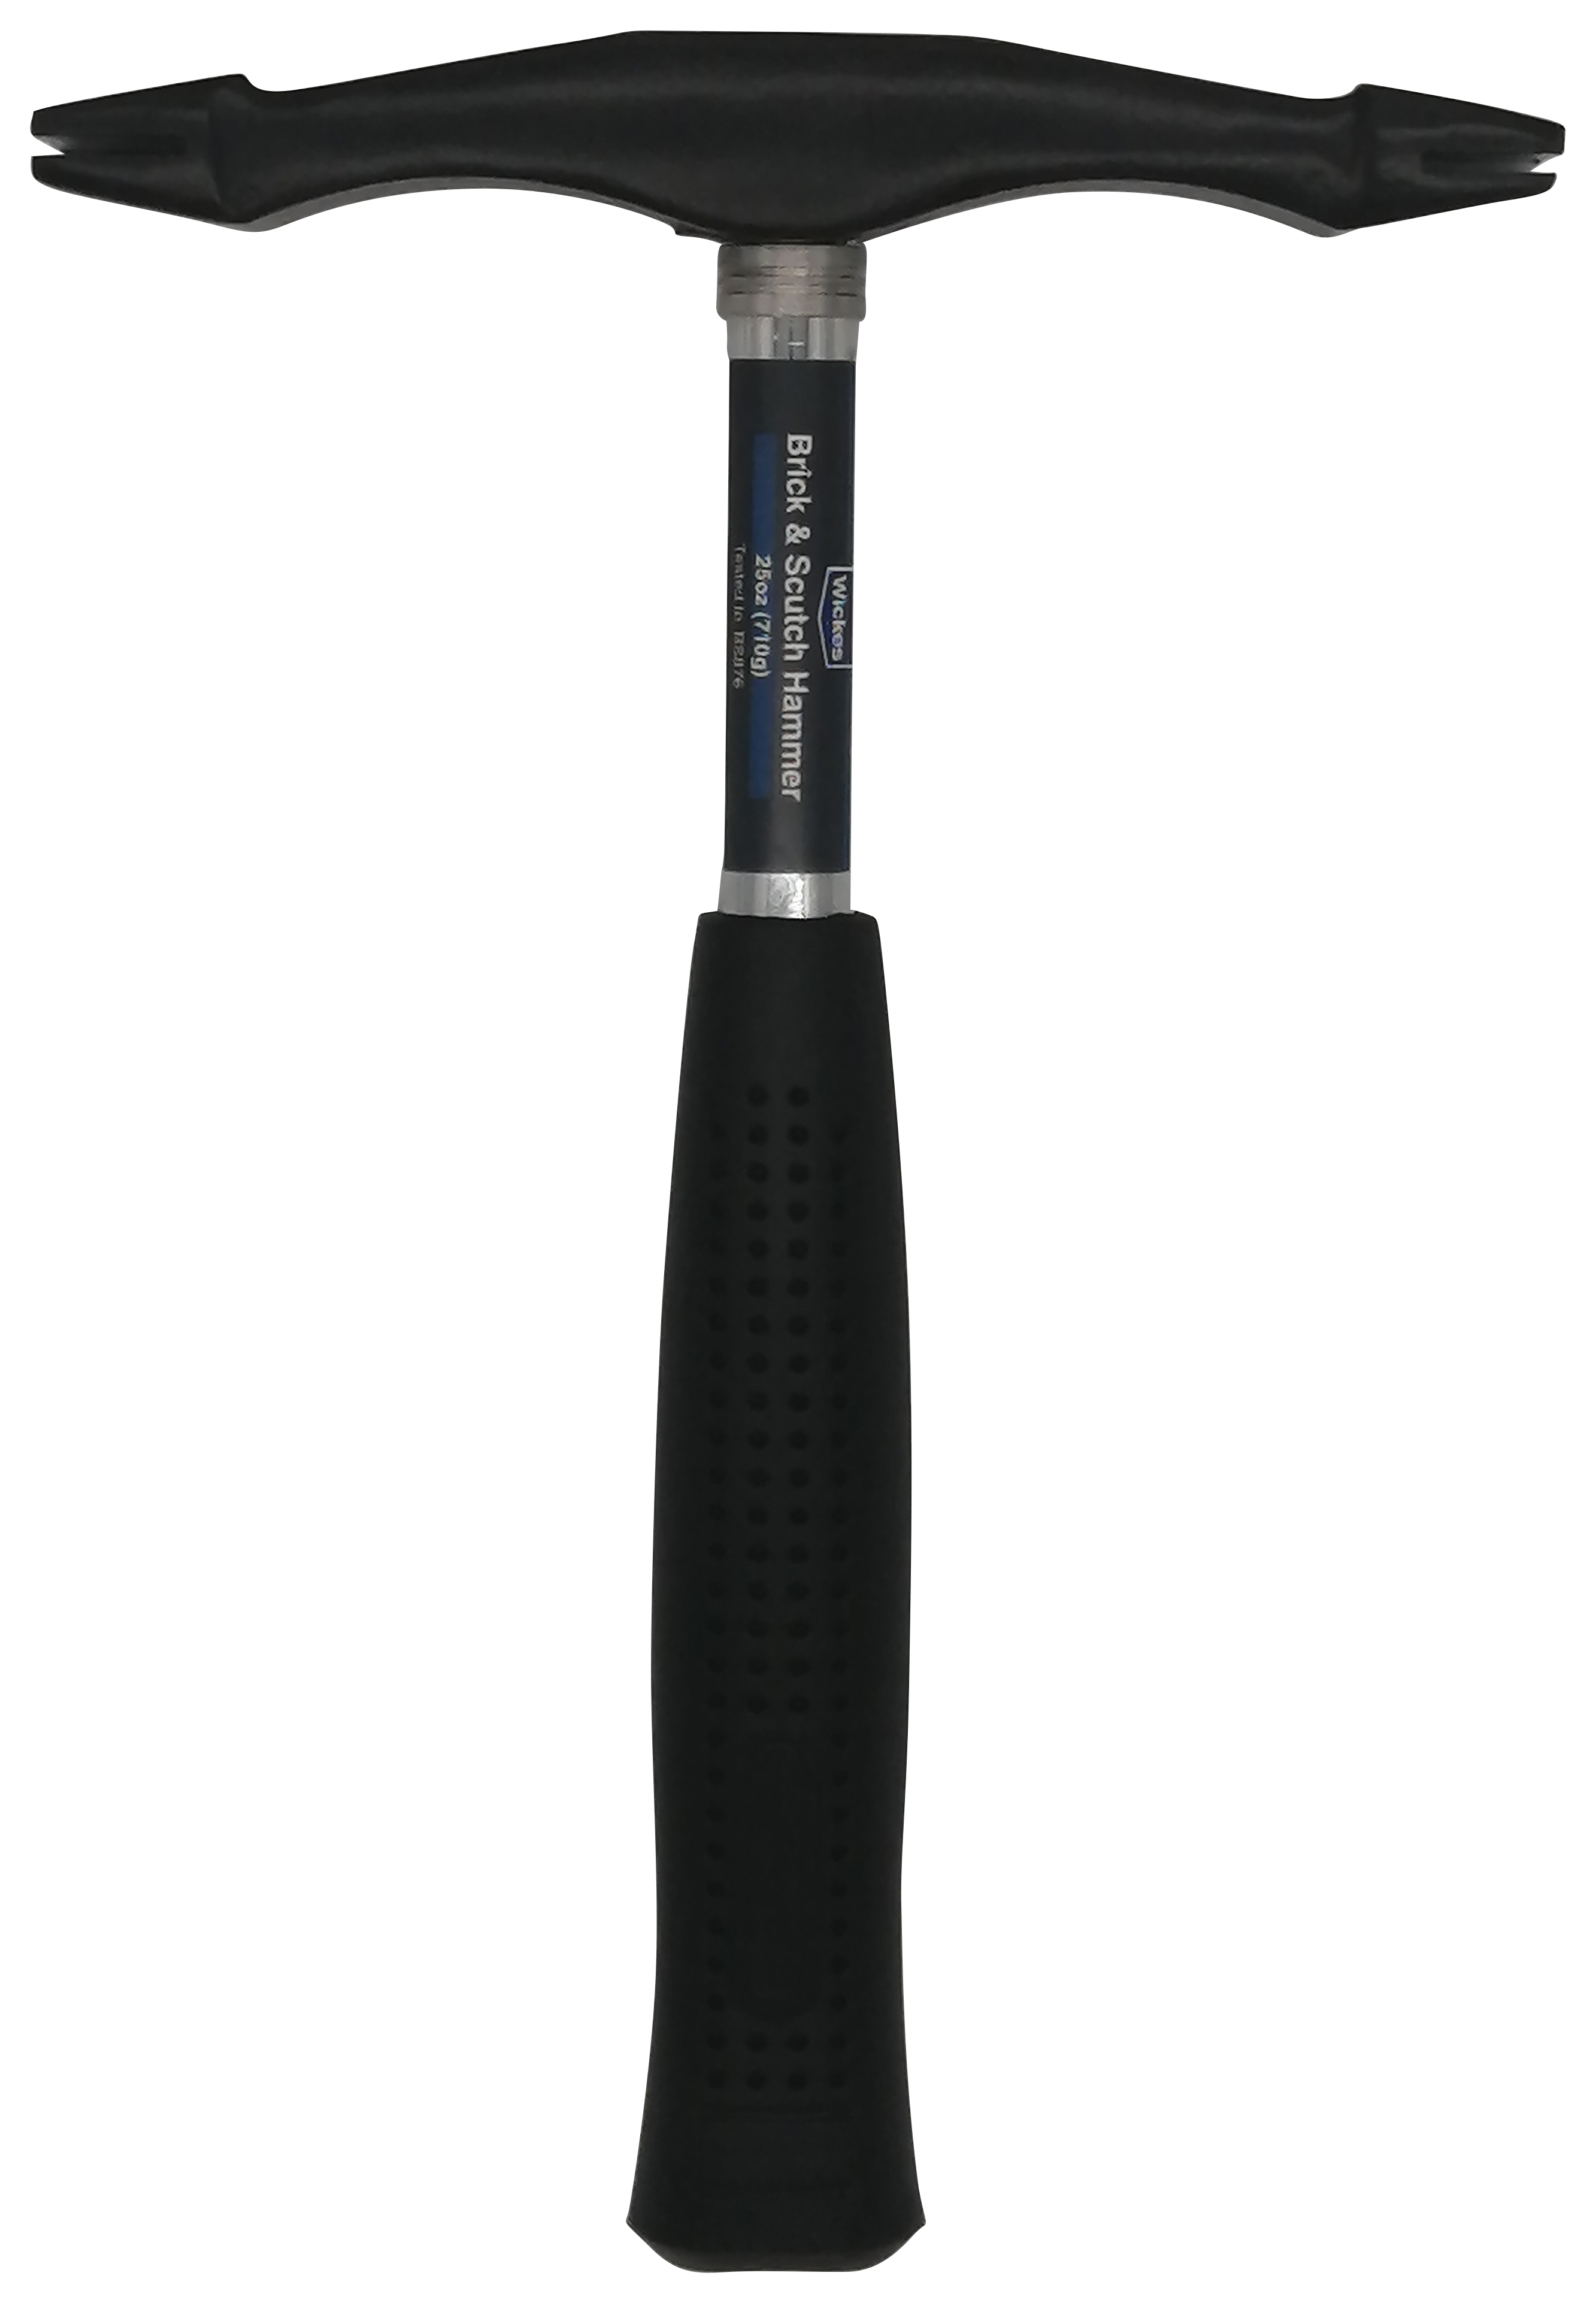 Image of Wickes Masonry Double Ended Scutch Rubber Grip Hammer